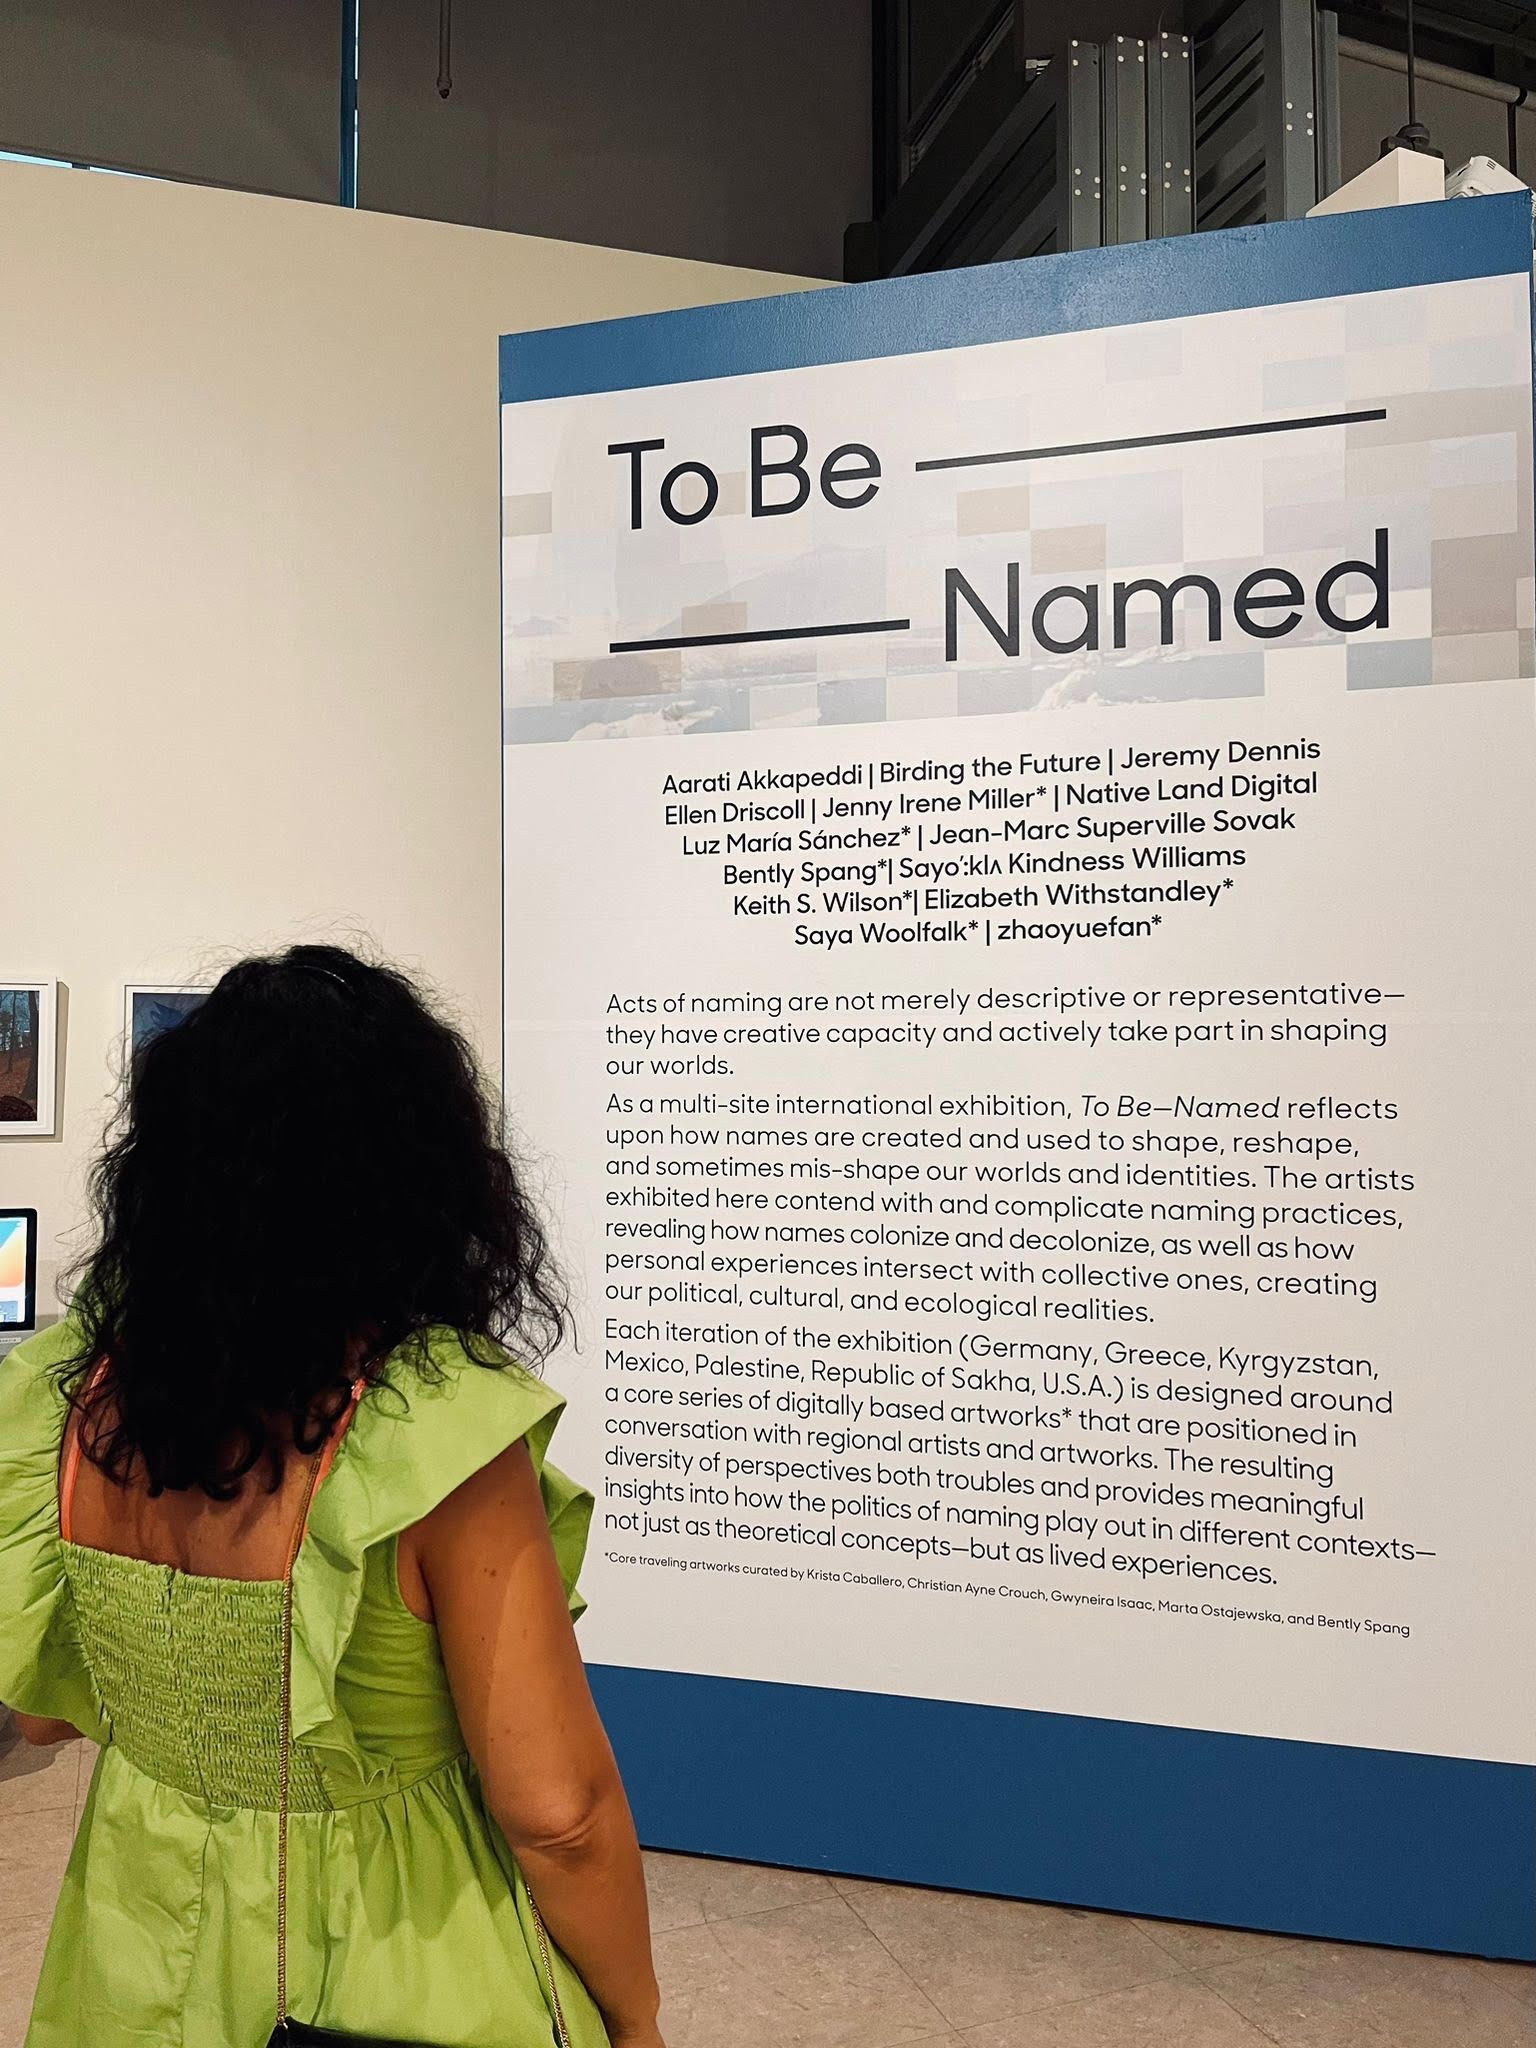 A person in a bright green dress looks at the exhibition introductory text